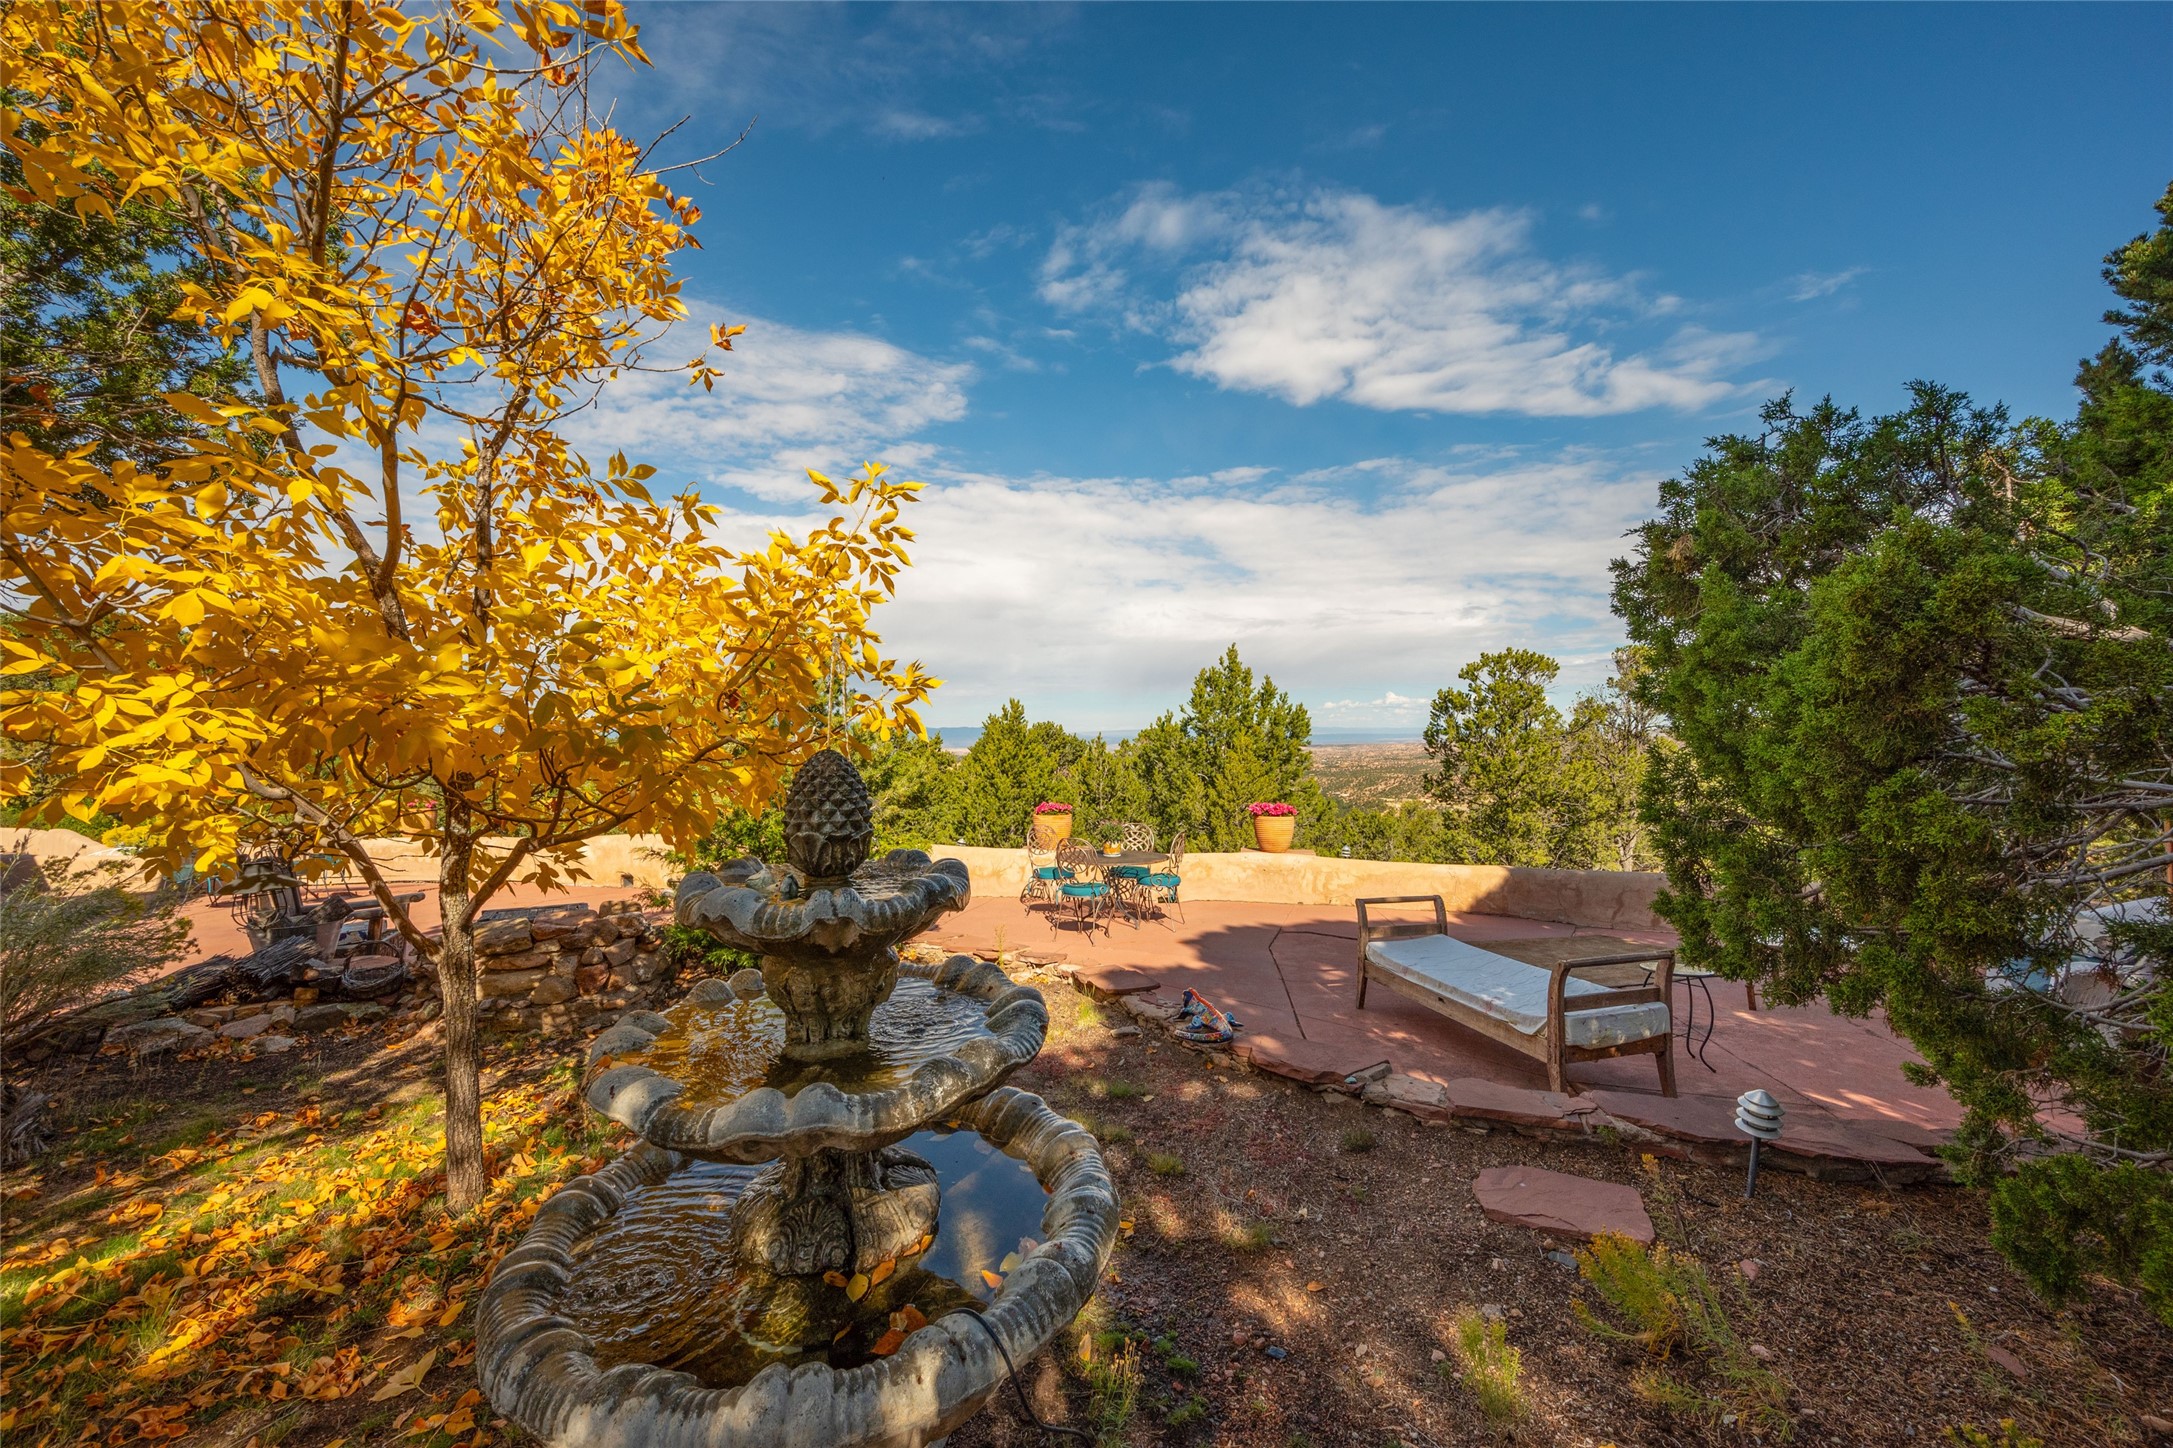 185 Brownell Howland, Santa Fe, New Mexico 87501, 5 Bedrooms Bedrooms, ,6 BathroomsBathrooms,Residential,For Sale,Brownell Howland,202341636